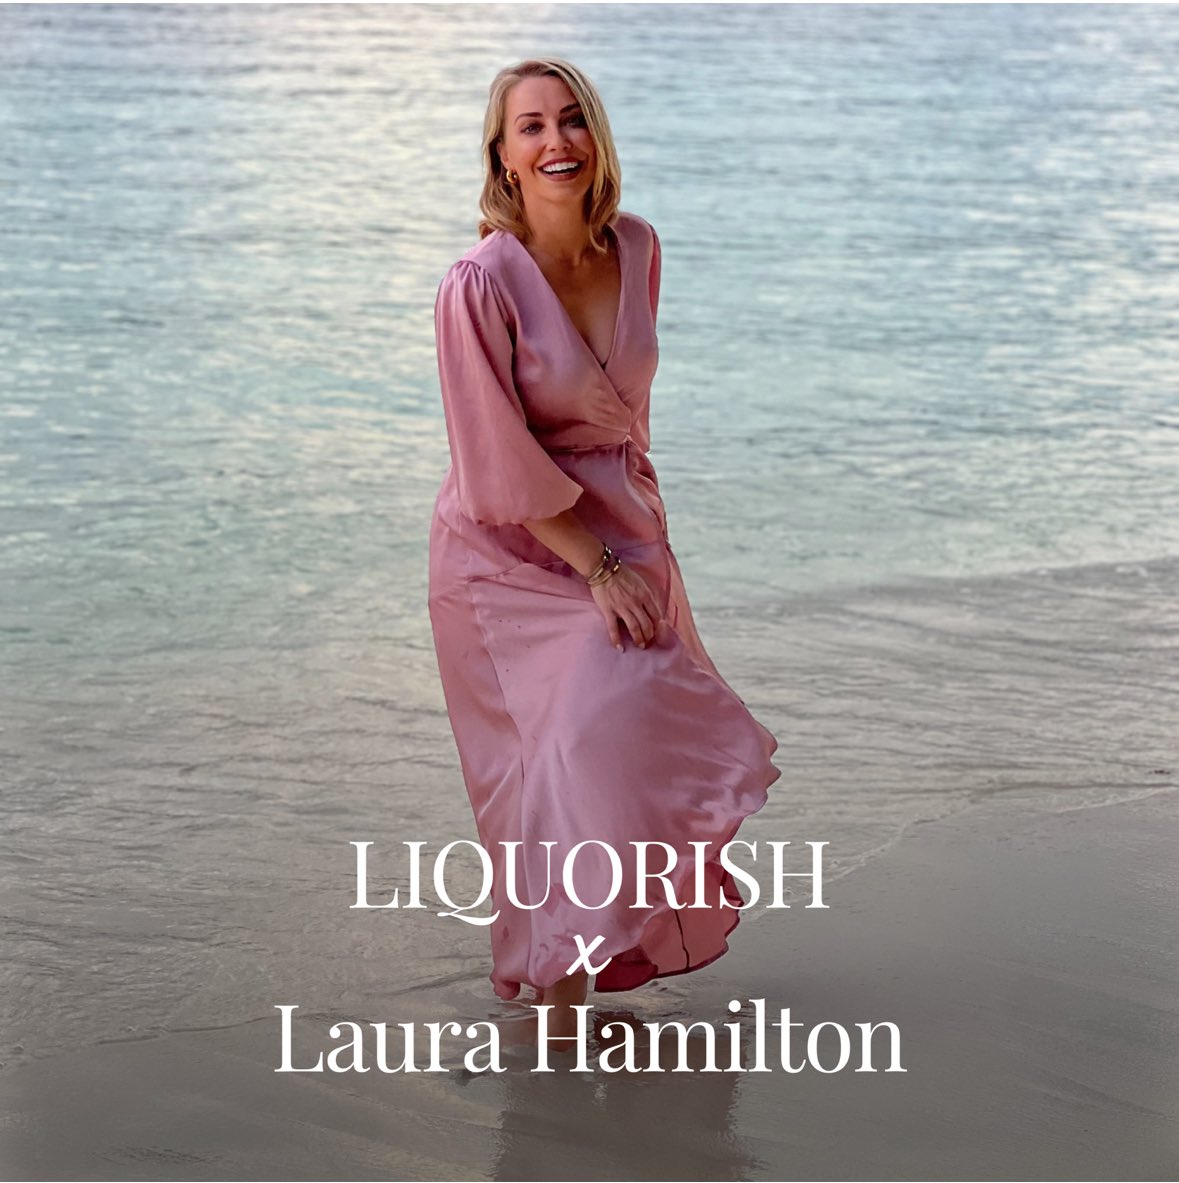 My @liquorishonline Summer Edit is now LIVE. There are some beautiful dresses and jumpsuits in the collection and if you use code LAURA10LIQ you will benefit from 10% off ANY full priced item #ad #ownedit #fashion #dresses #summer #threads #style